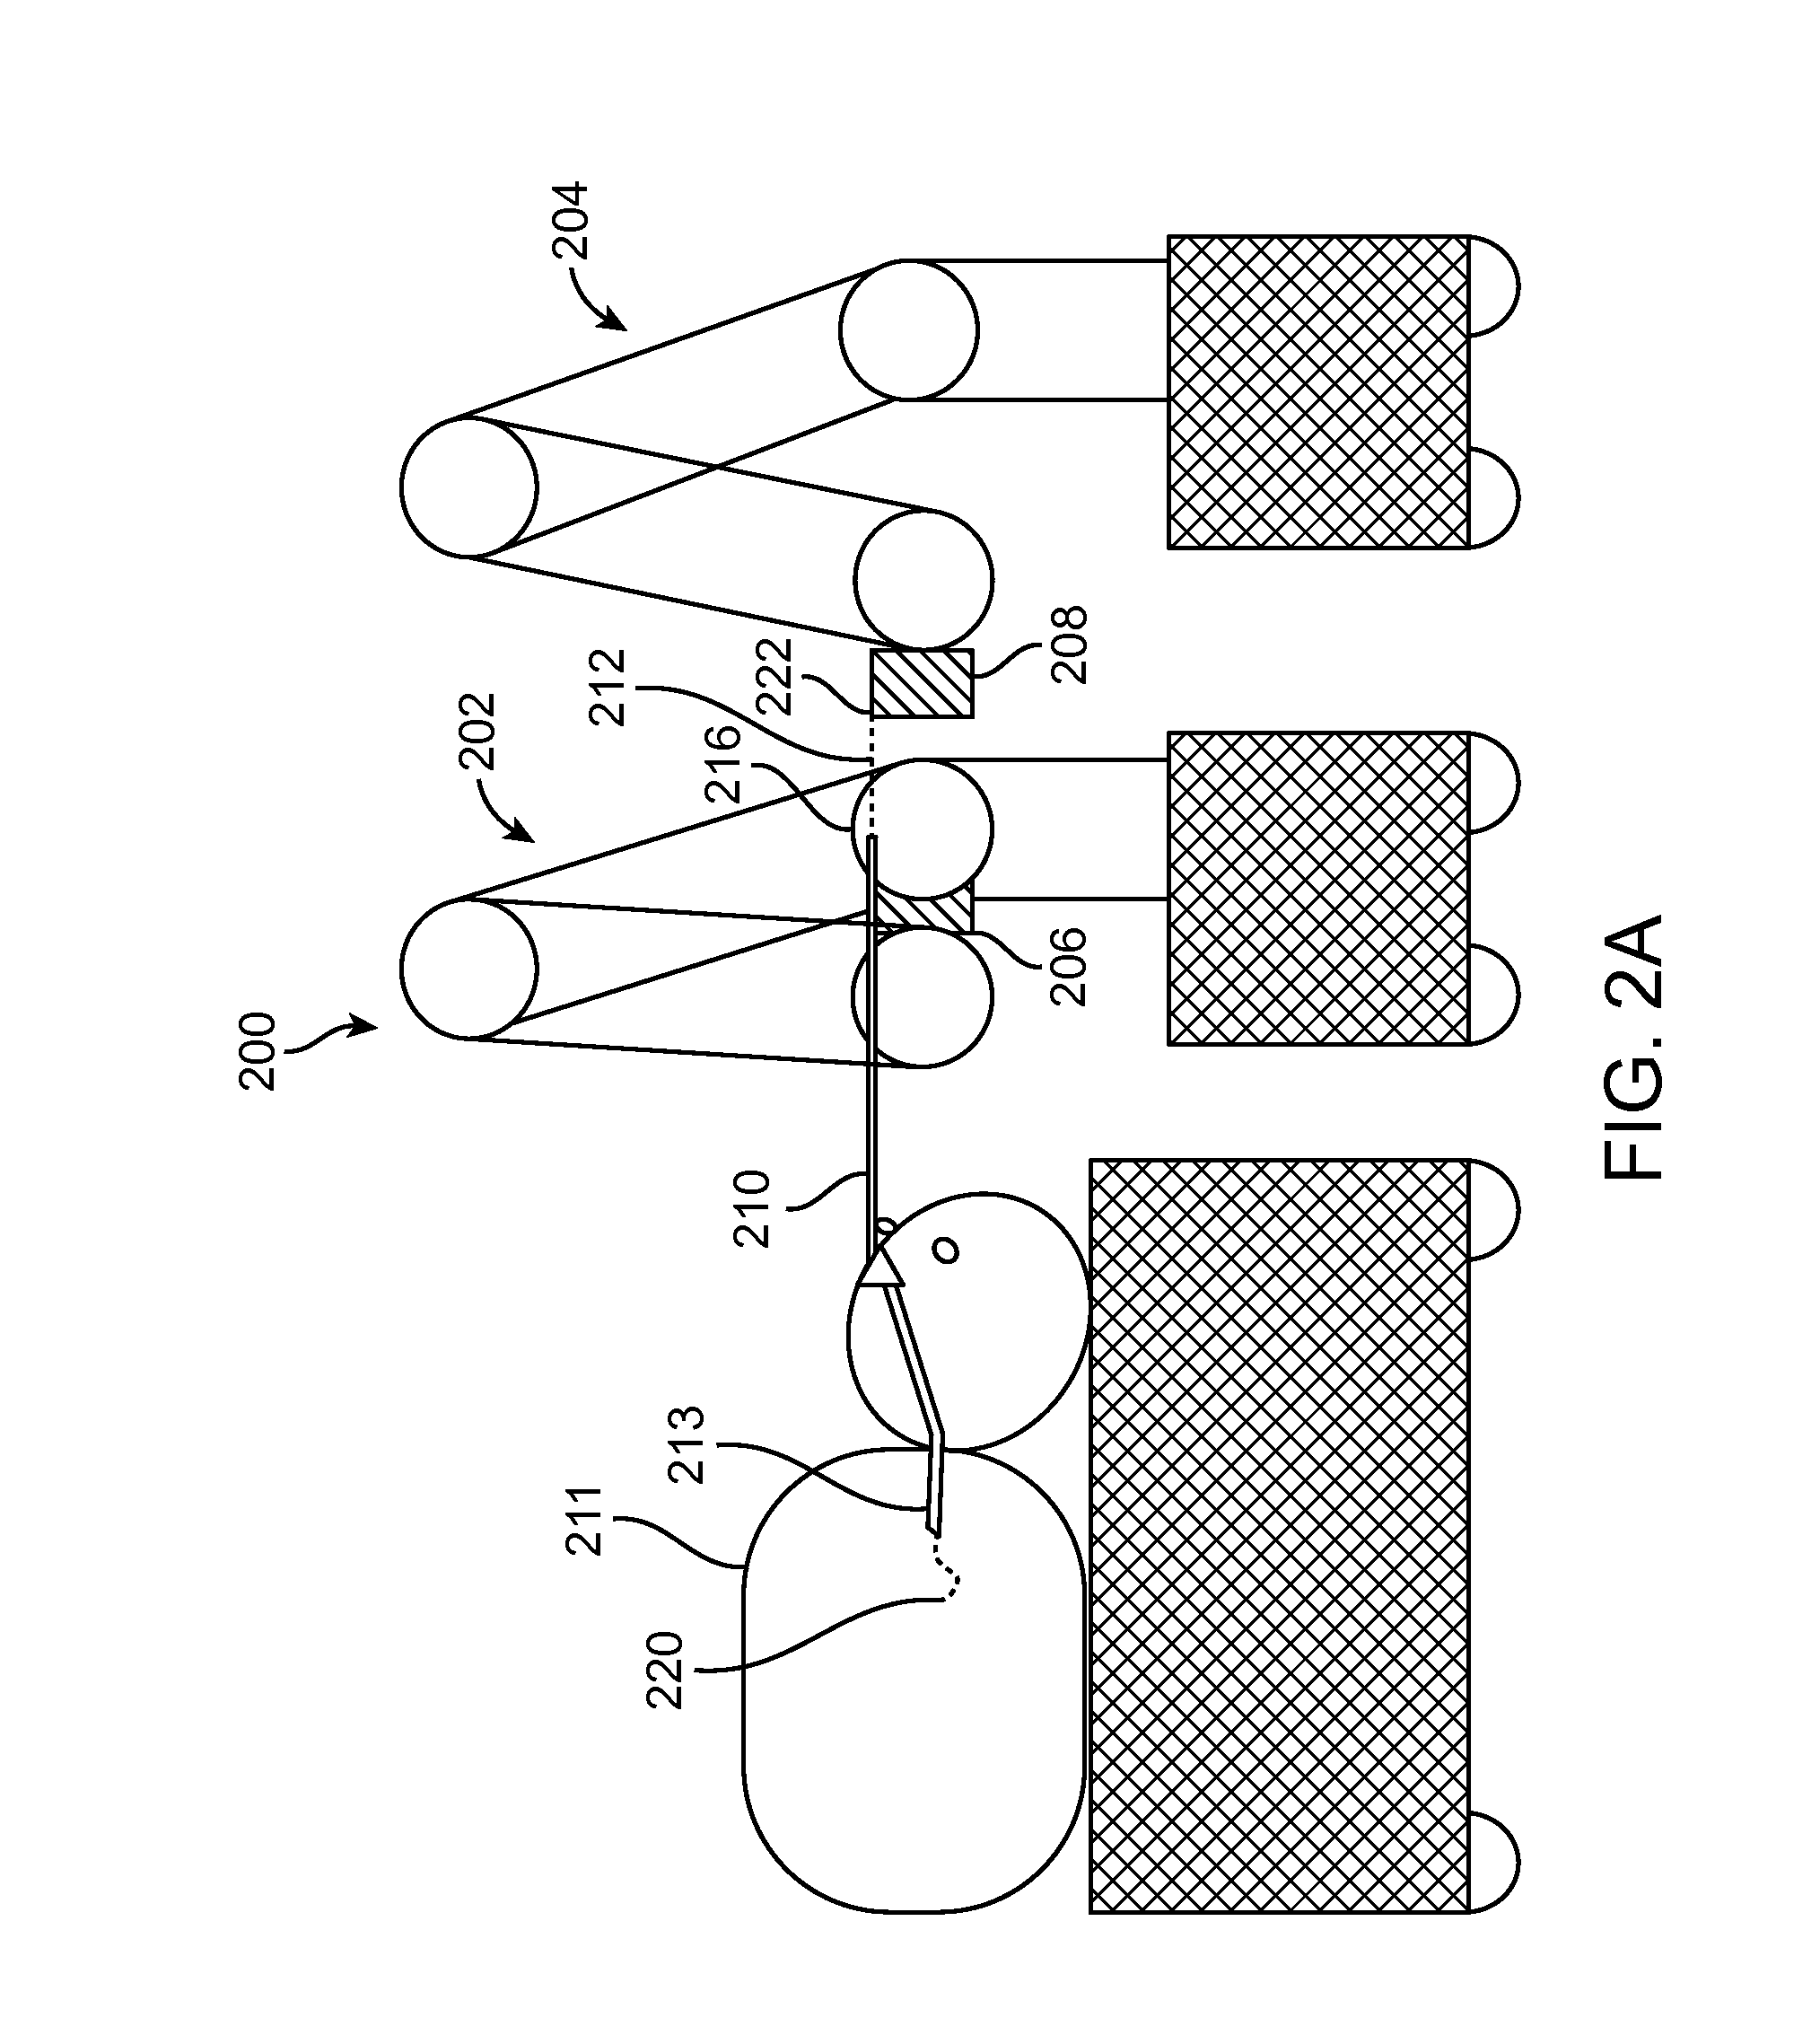 Endoscopic device with double-helical lumen design